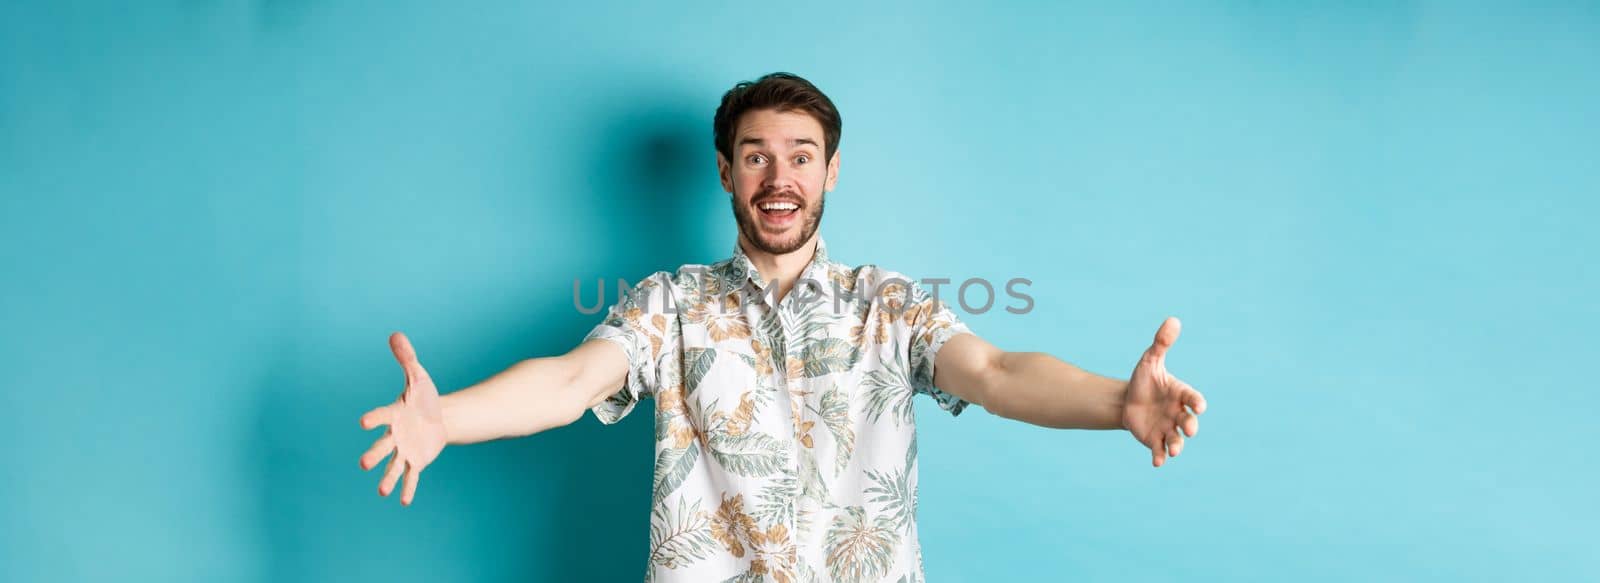 Summer holiday. Cheerful tourist stretch out hands for hug, welcome someone with friendly smile, greeting you, standing on blue background.